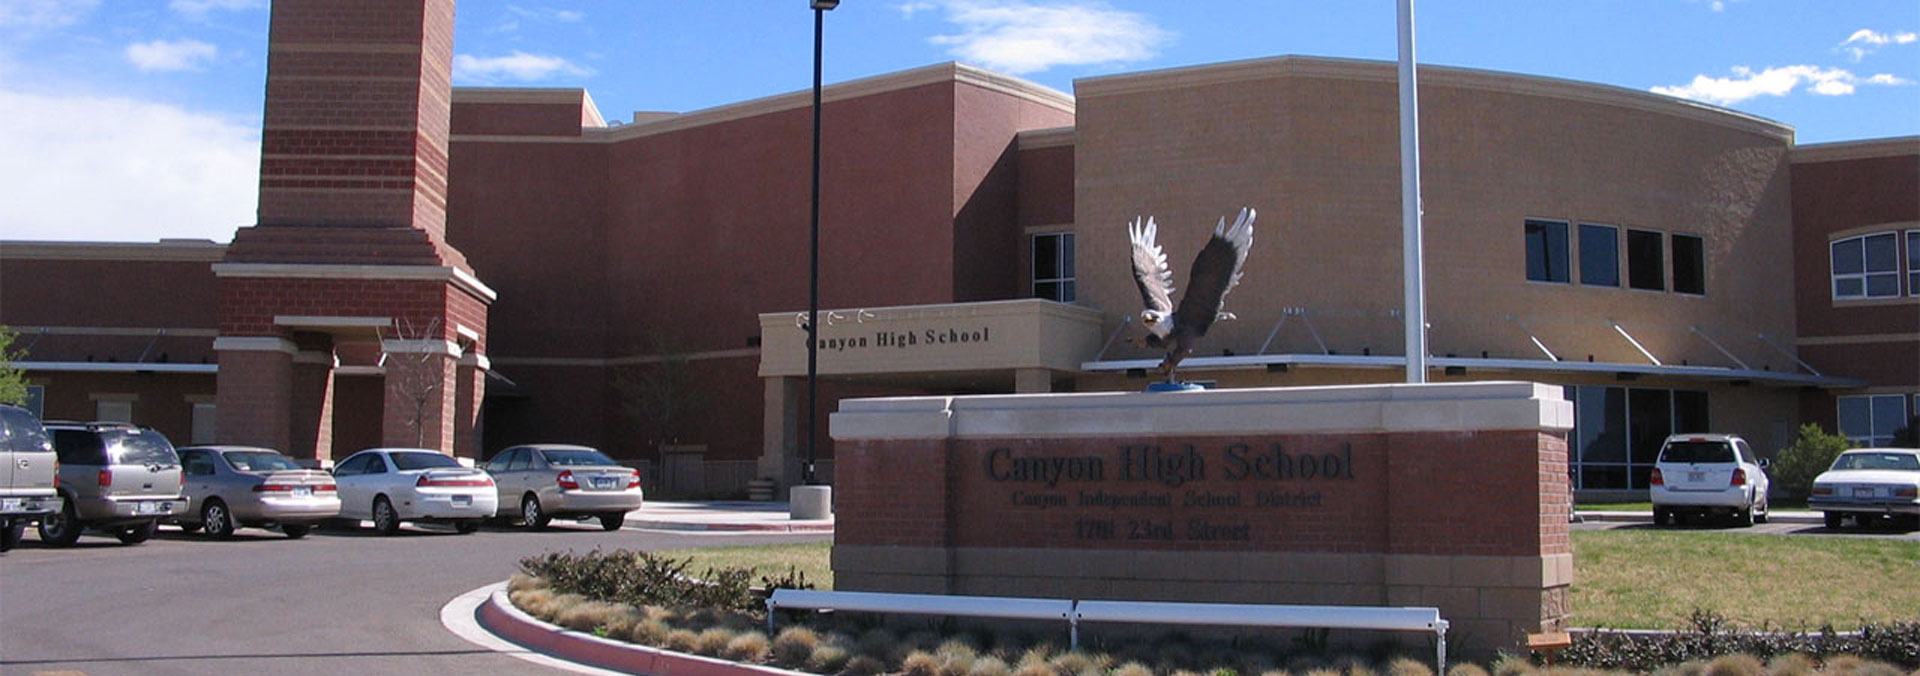 Banner picture of the Front of Canyon High School and a sign outside of the High School of an Eagle Mascot sculpture,